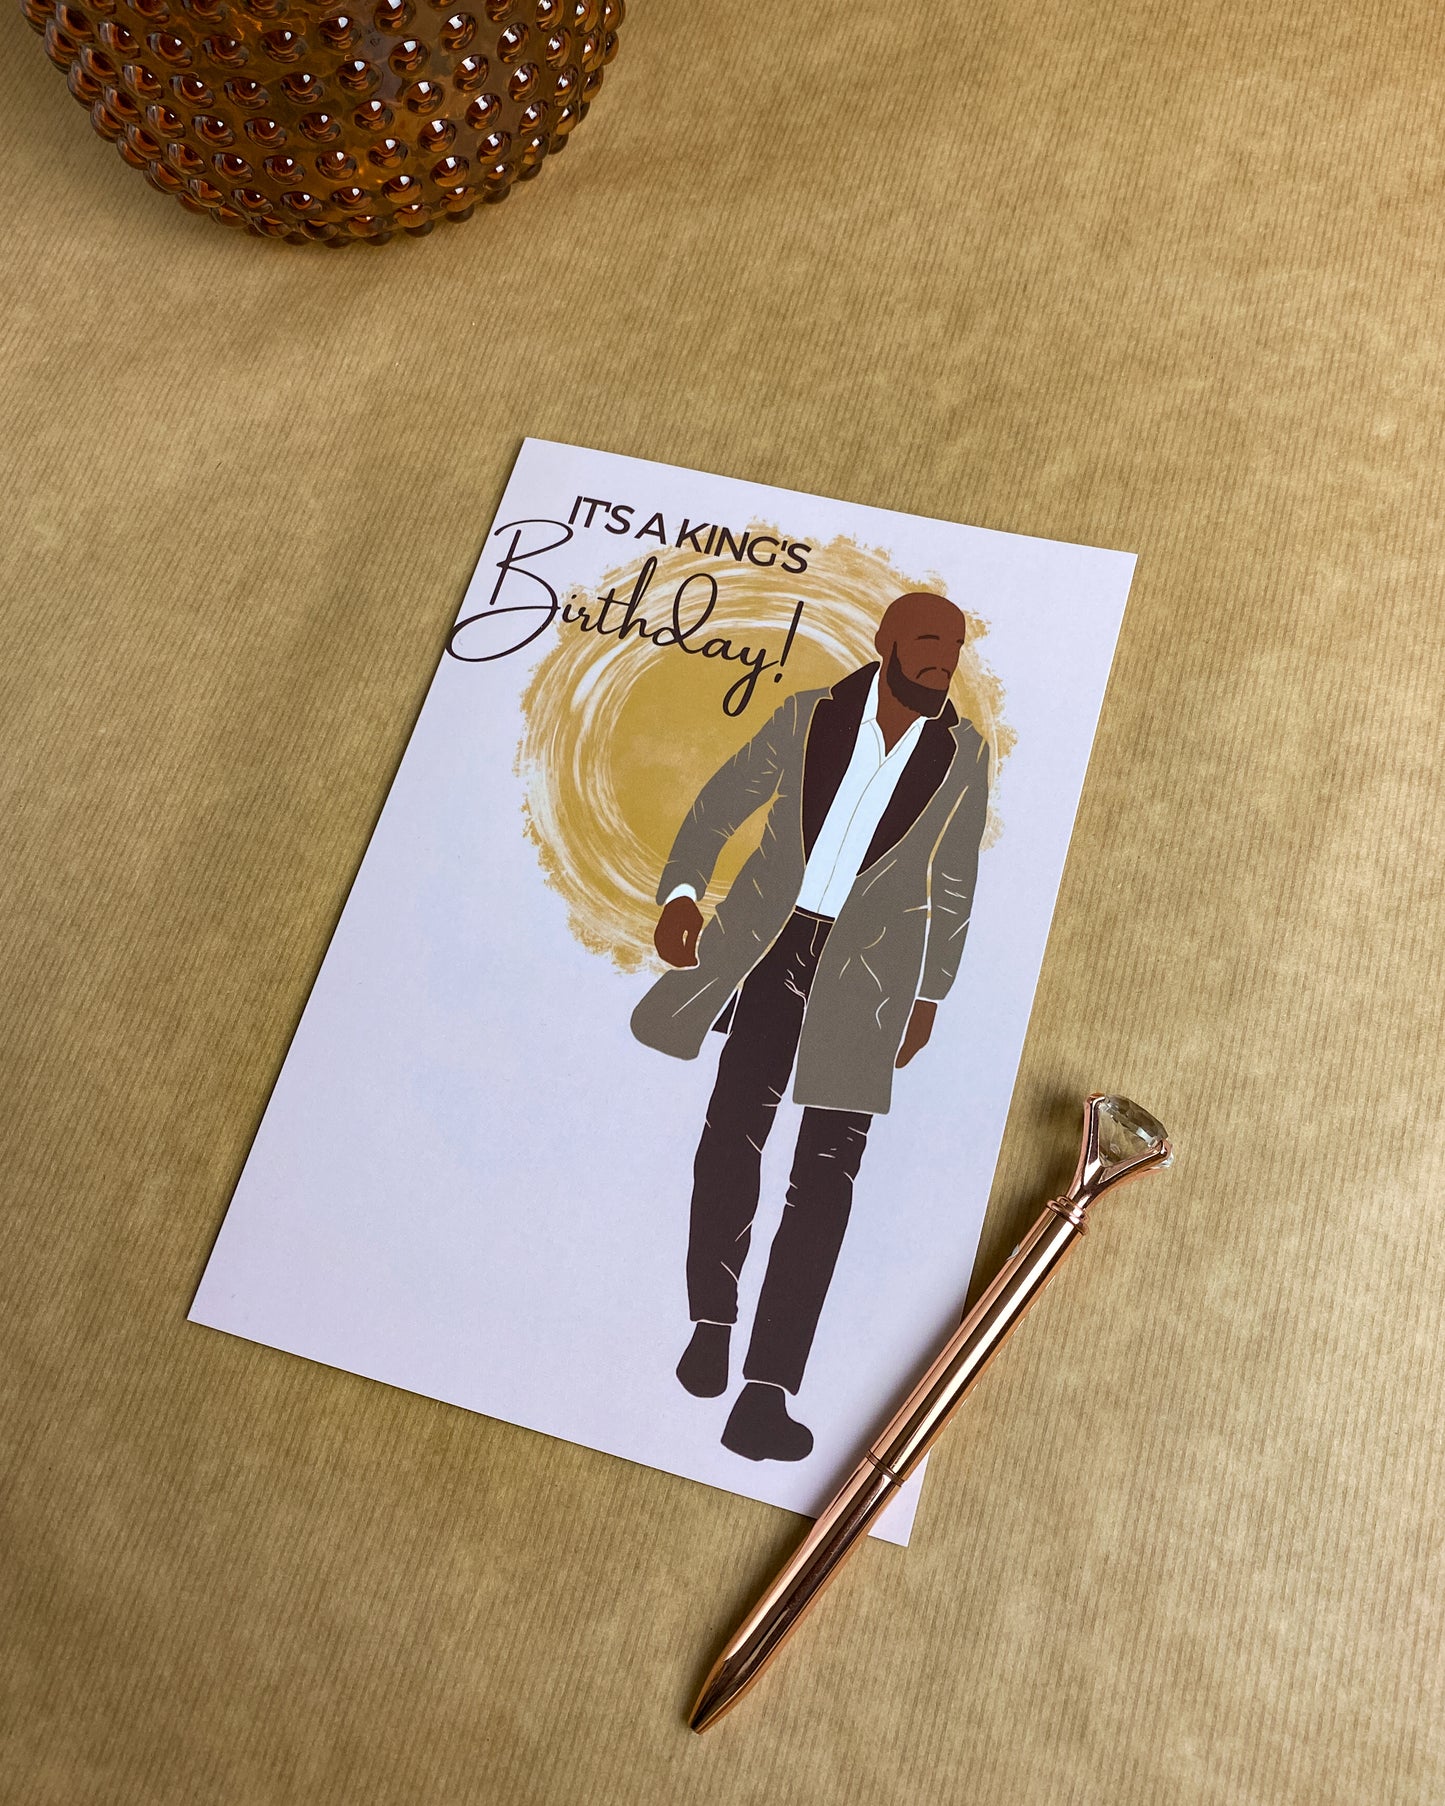 Bald, Bearded & Suited Man - King Happy Birthday Card.